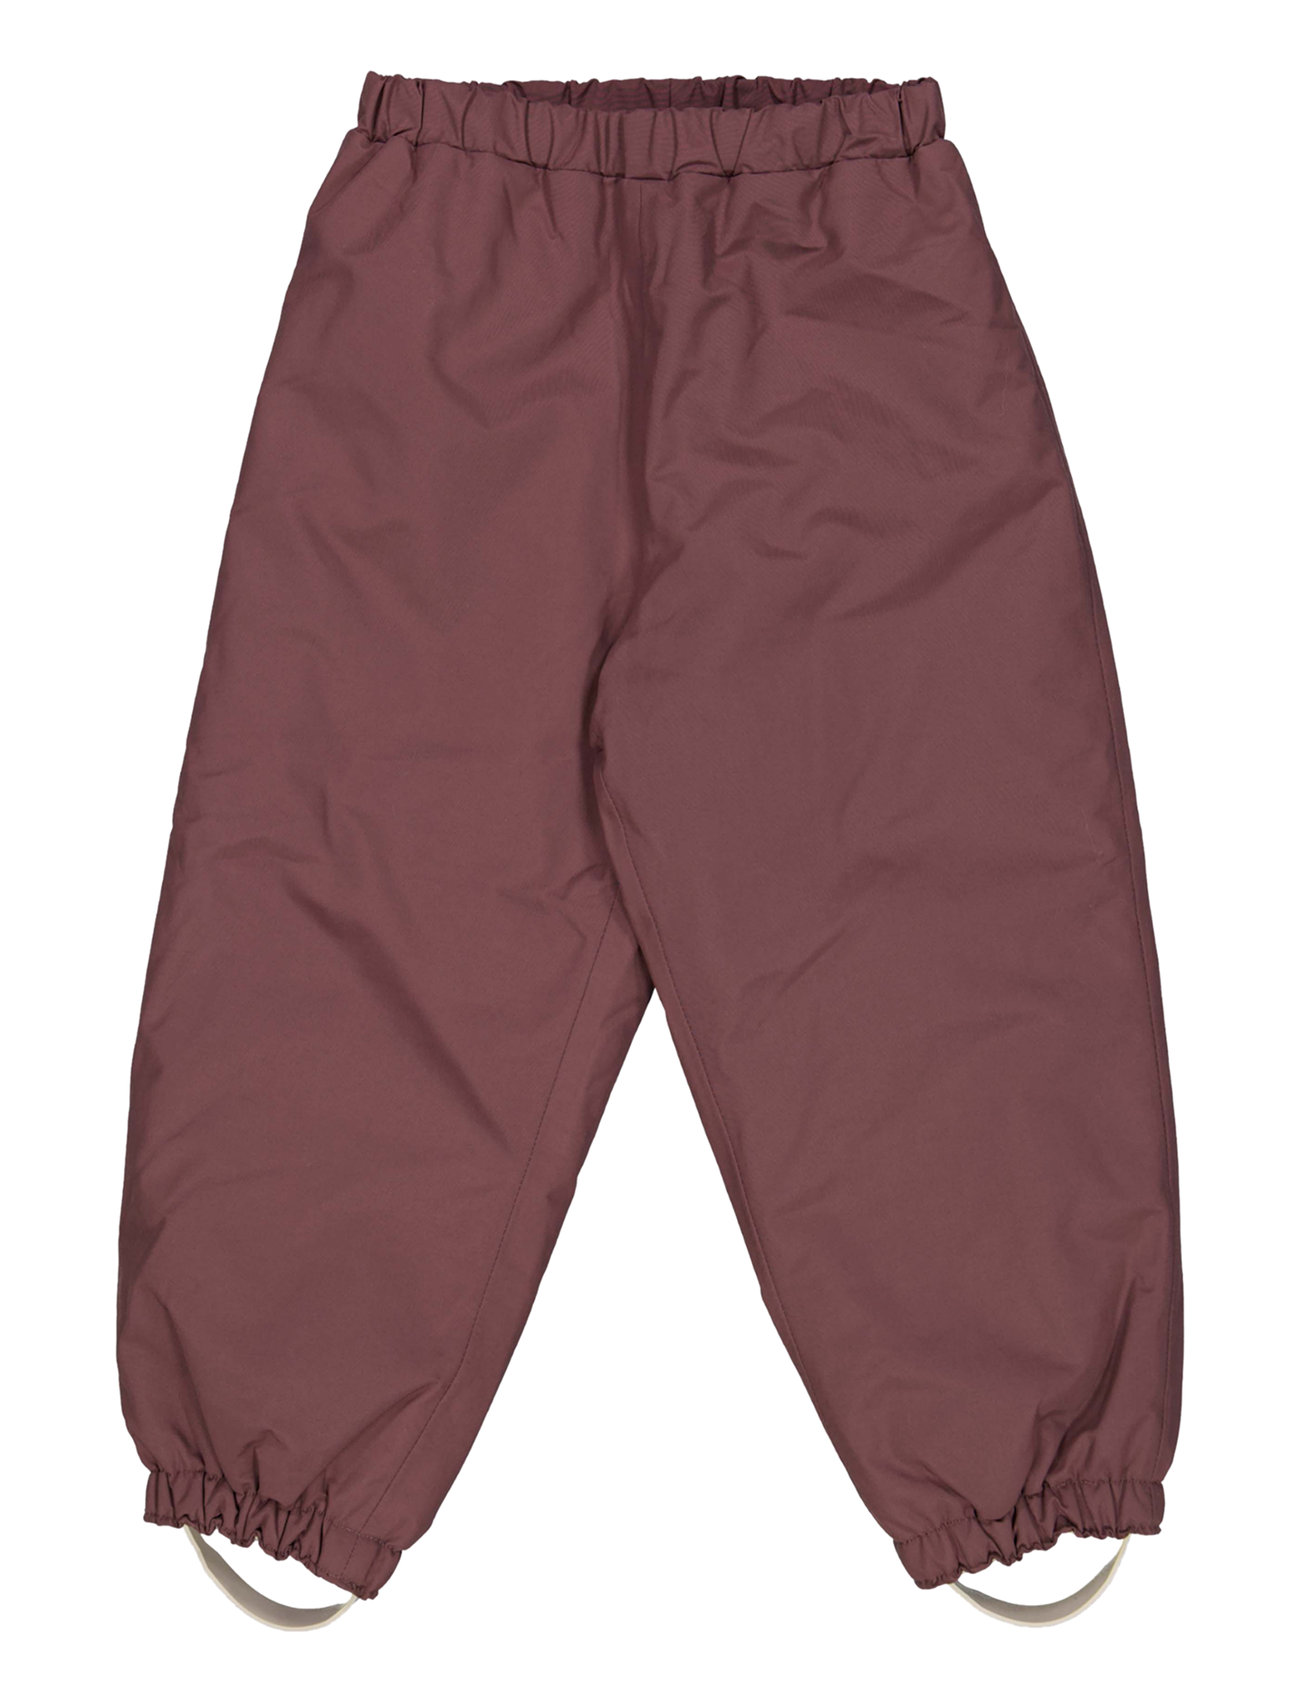 Wheat Ski Jay 41.97 €. Buy Winter trousers from Wheat online at Boozt.com. Fast delivery and returns